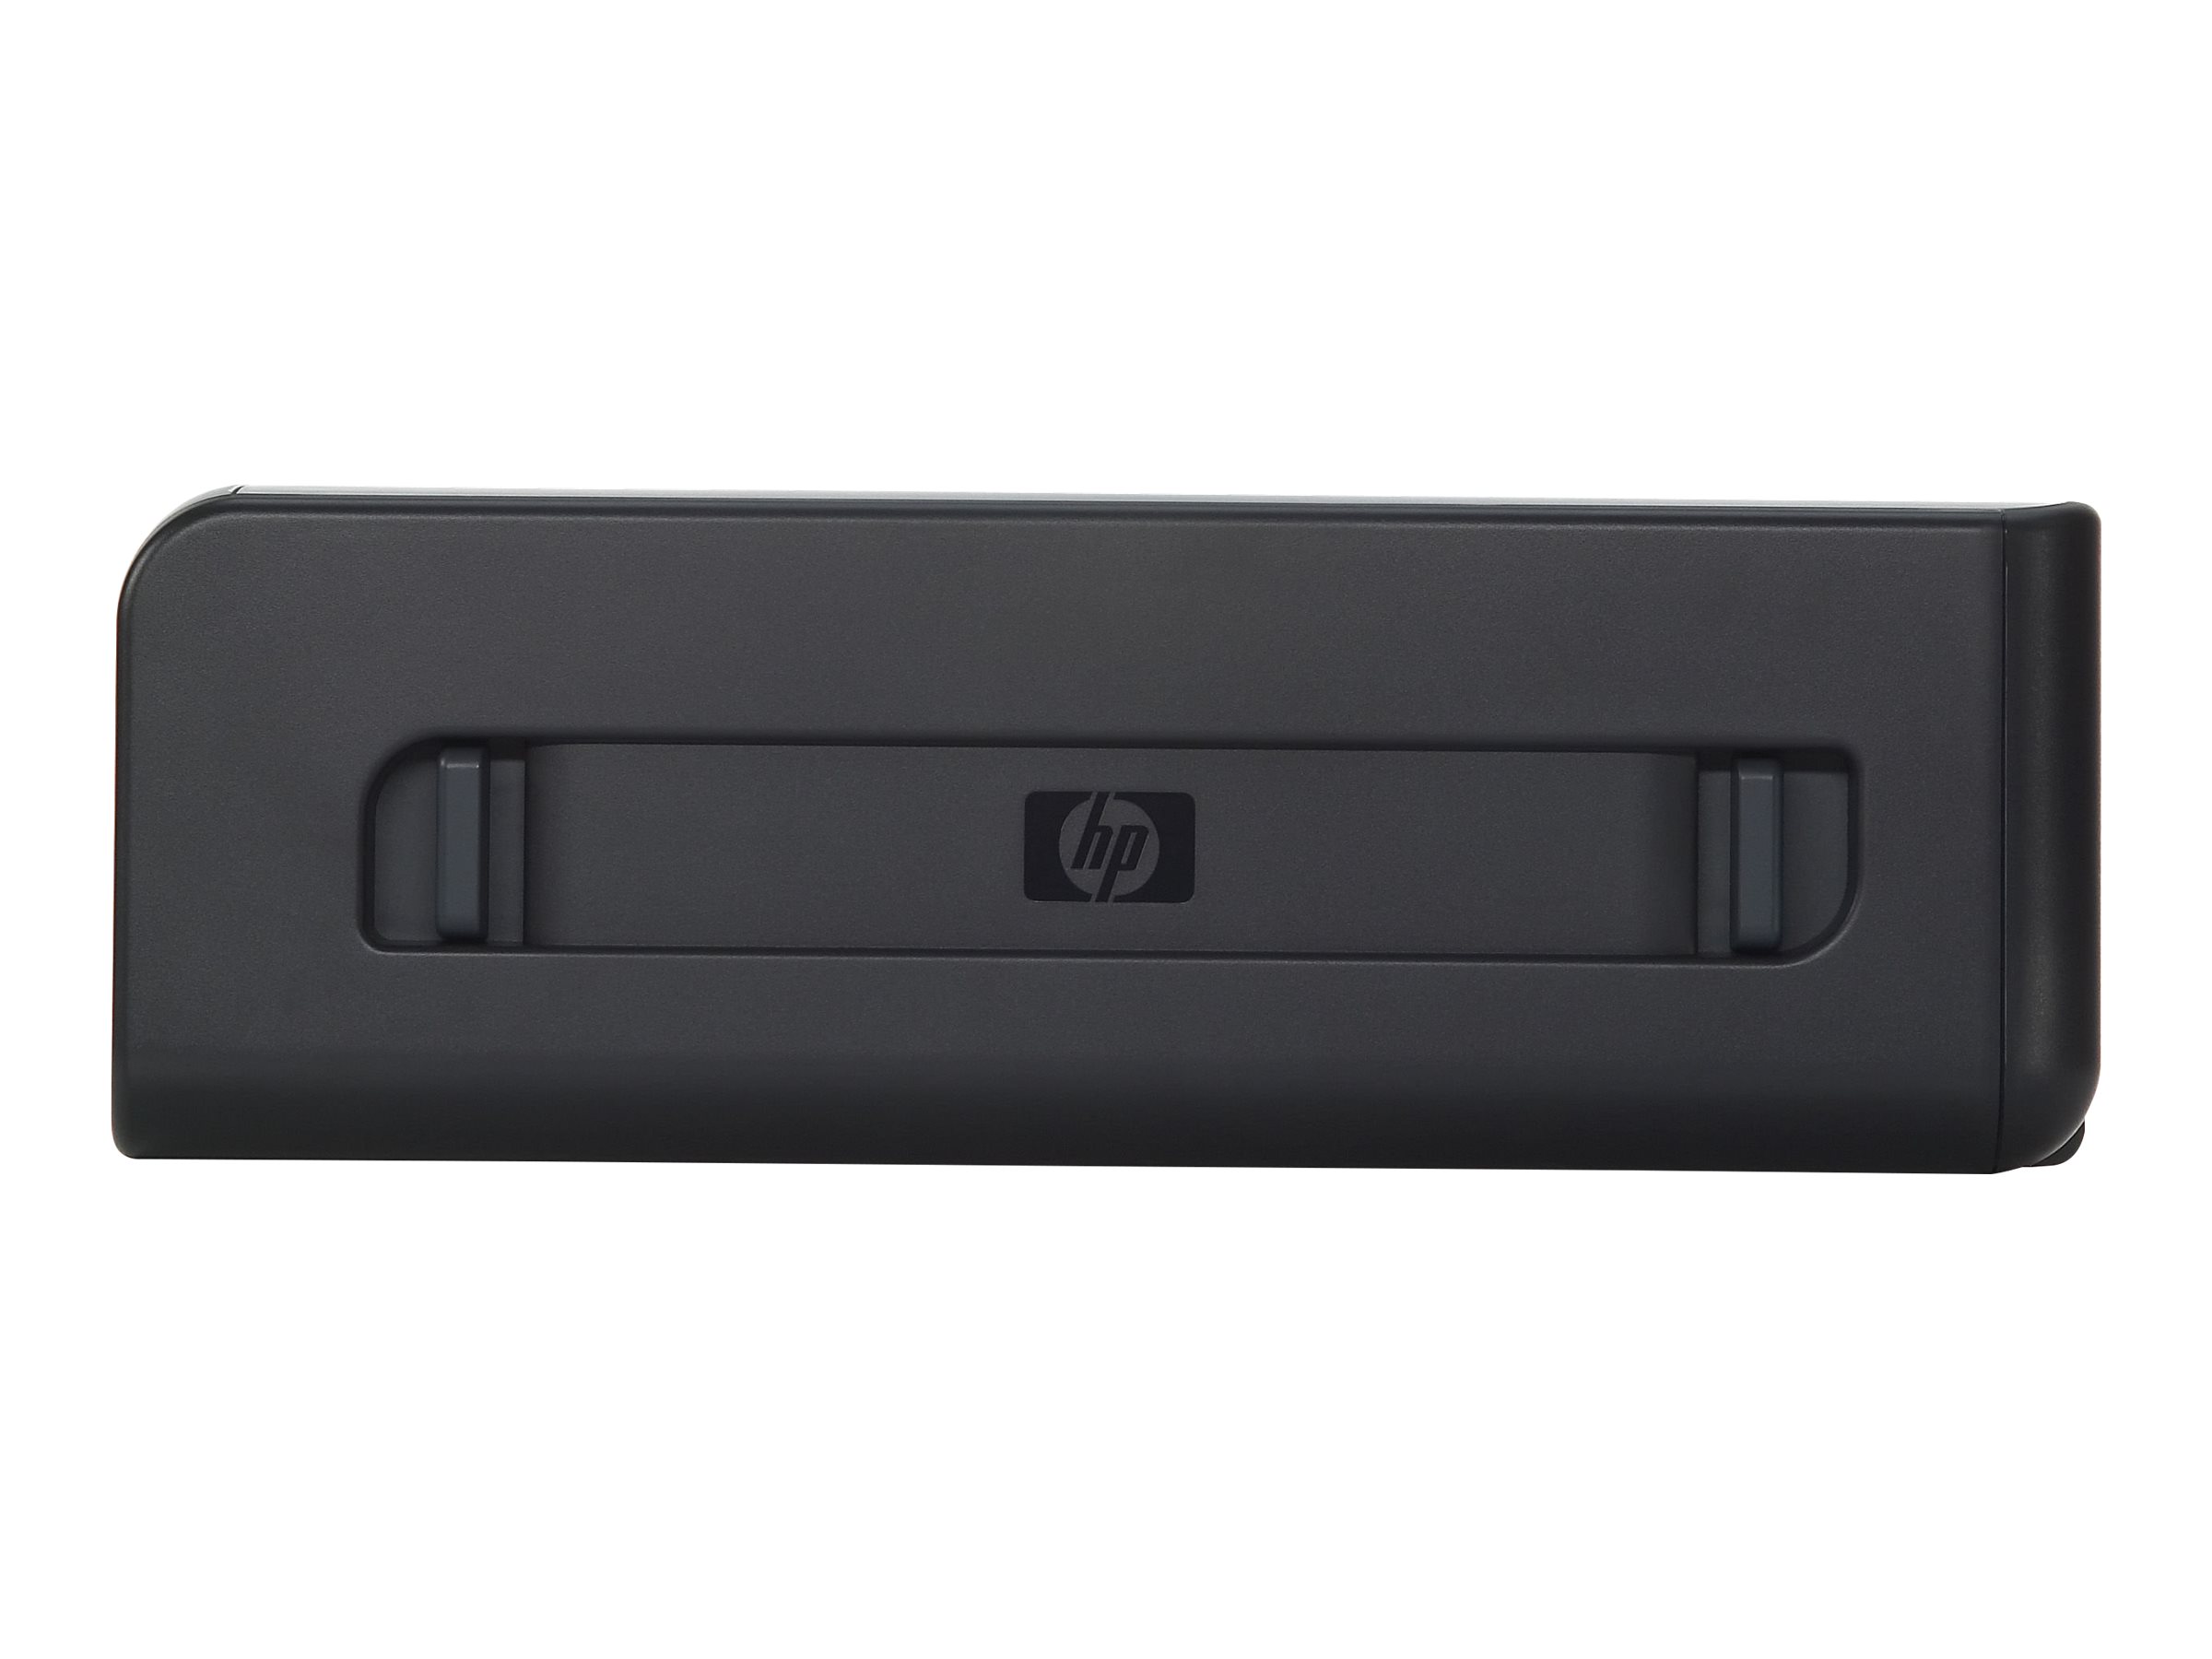 HP Automatic Two-Sided Printing Accessory - Duplexeinheit - f?r Officejet 7110, 7110 Wide Format ePrinter, 7110xi, 7610 Wide Format, 7612 Wide Format